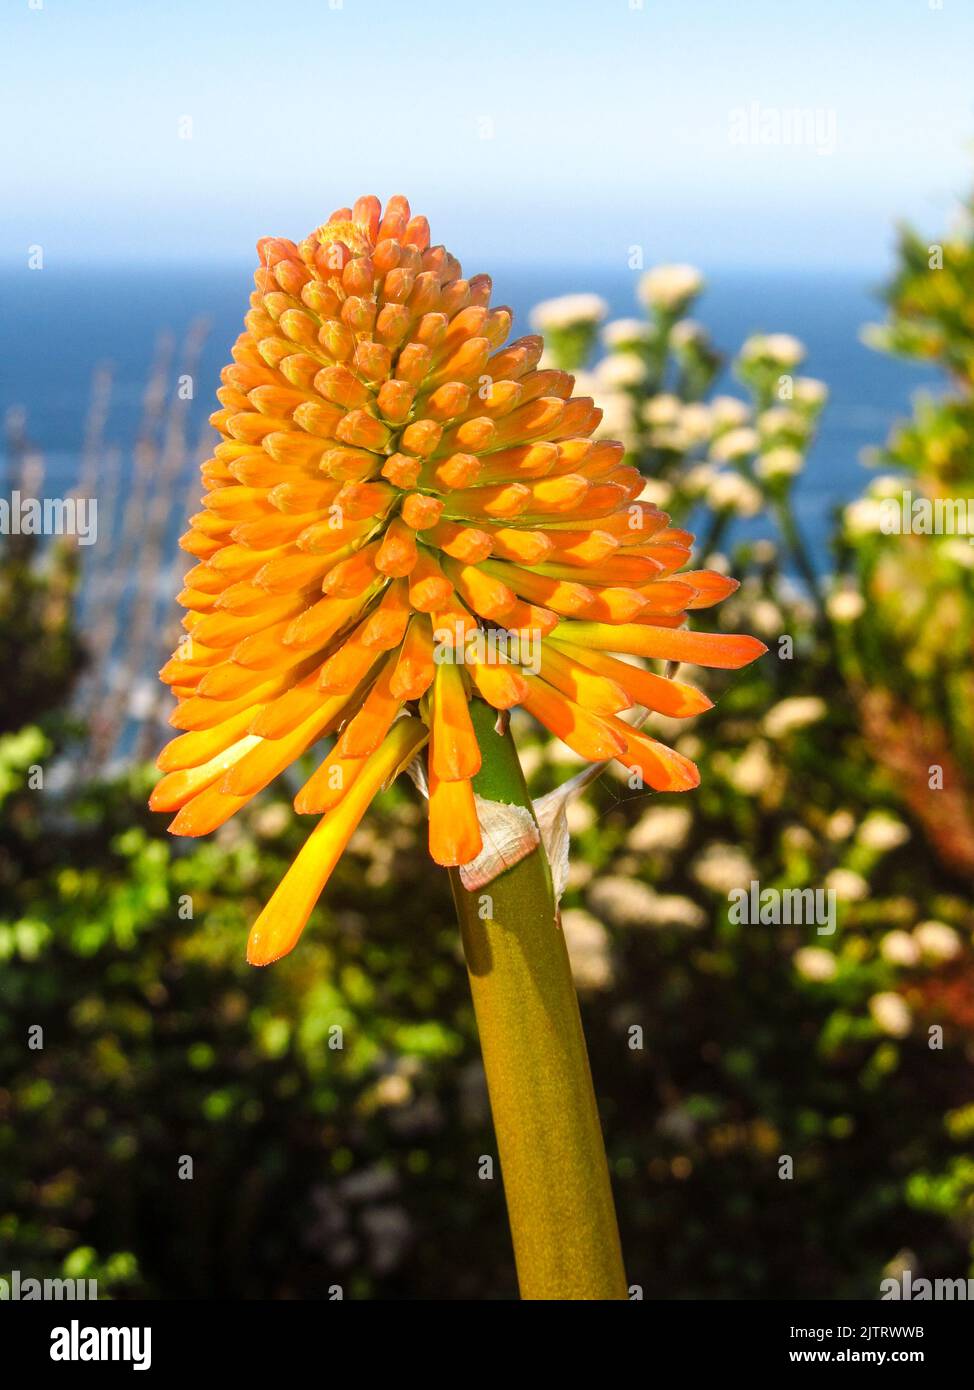 The orange flower bud of a Cape Poker, Kniphofia Uvaria, growing between the fynbos on the cliffs of the Tsitsikamma coast of South Africa. Stock Photo